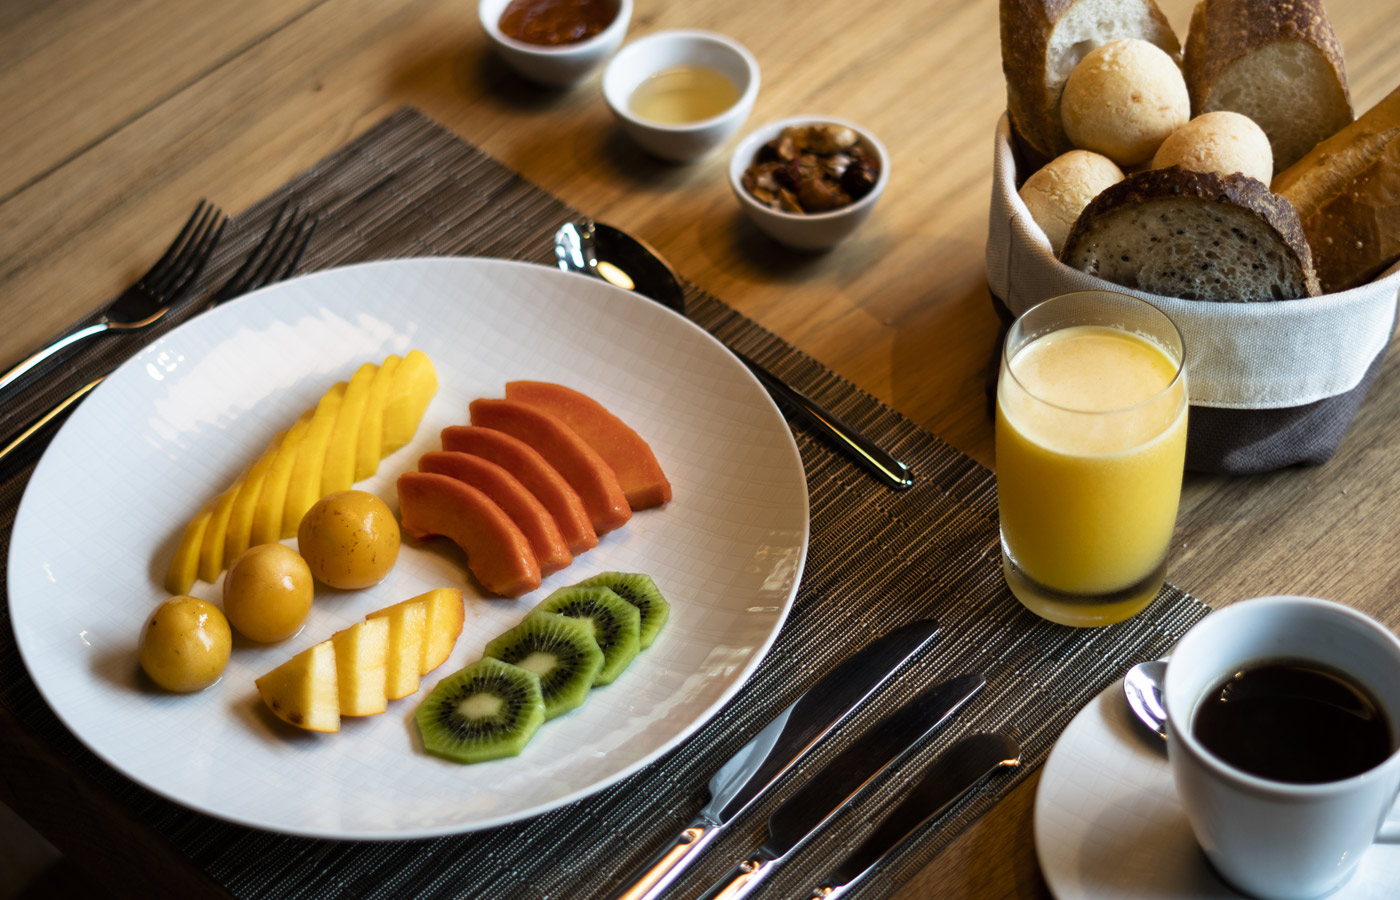 Breakfast at Hotel Casana is included in the rate